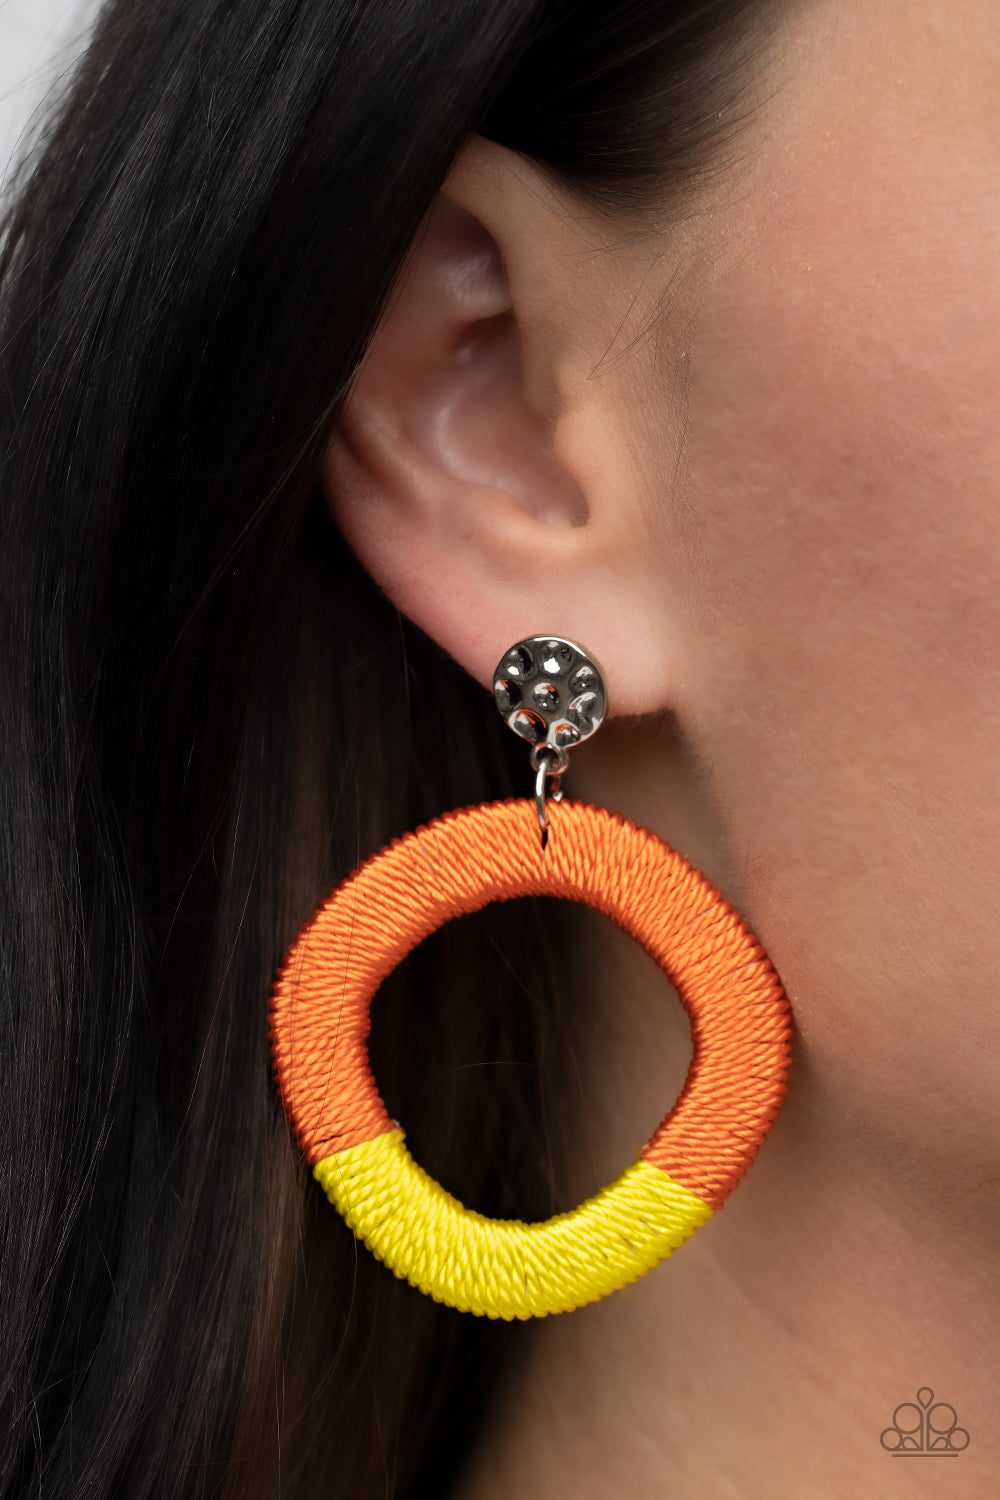 Thats a WRAPAROUND Multi Post Earring - Paparazzi Accessories  A hammered silver disc gives way to a wooden frame decoratively wrapped in shiny orange and yellow threaded accents, creating a colorful lure. Earring attaches to a standard post fitting.  Sold as one pair of post earrings.